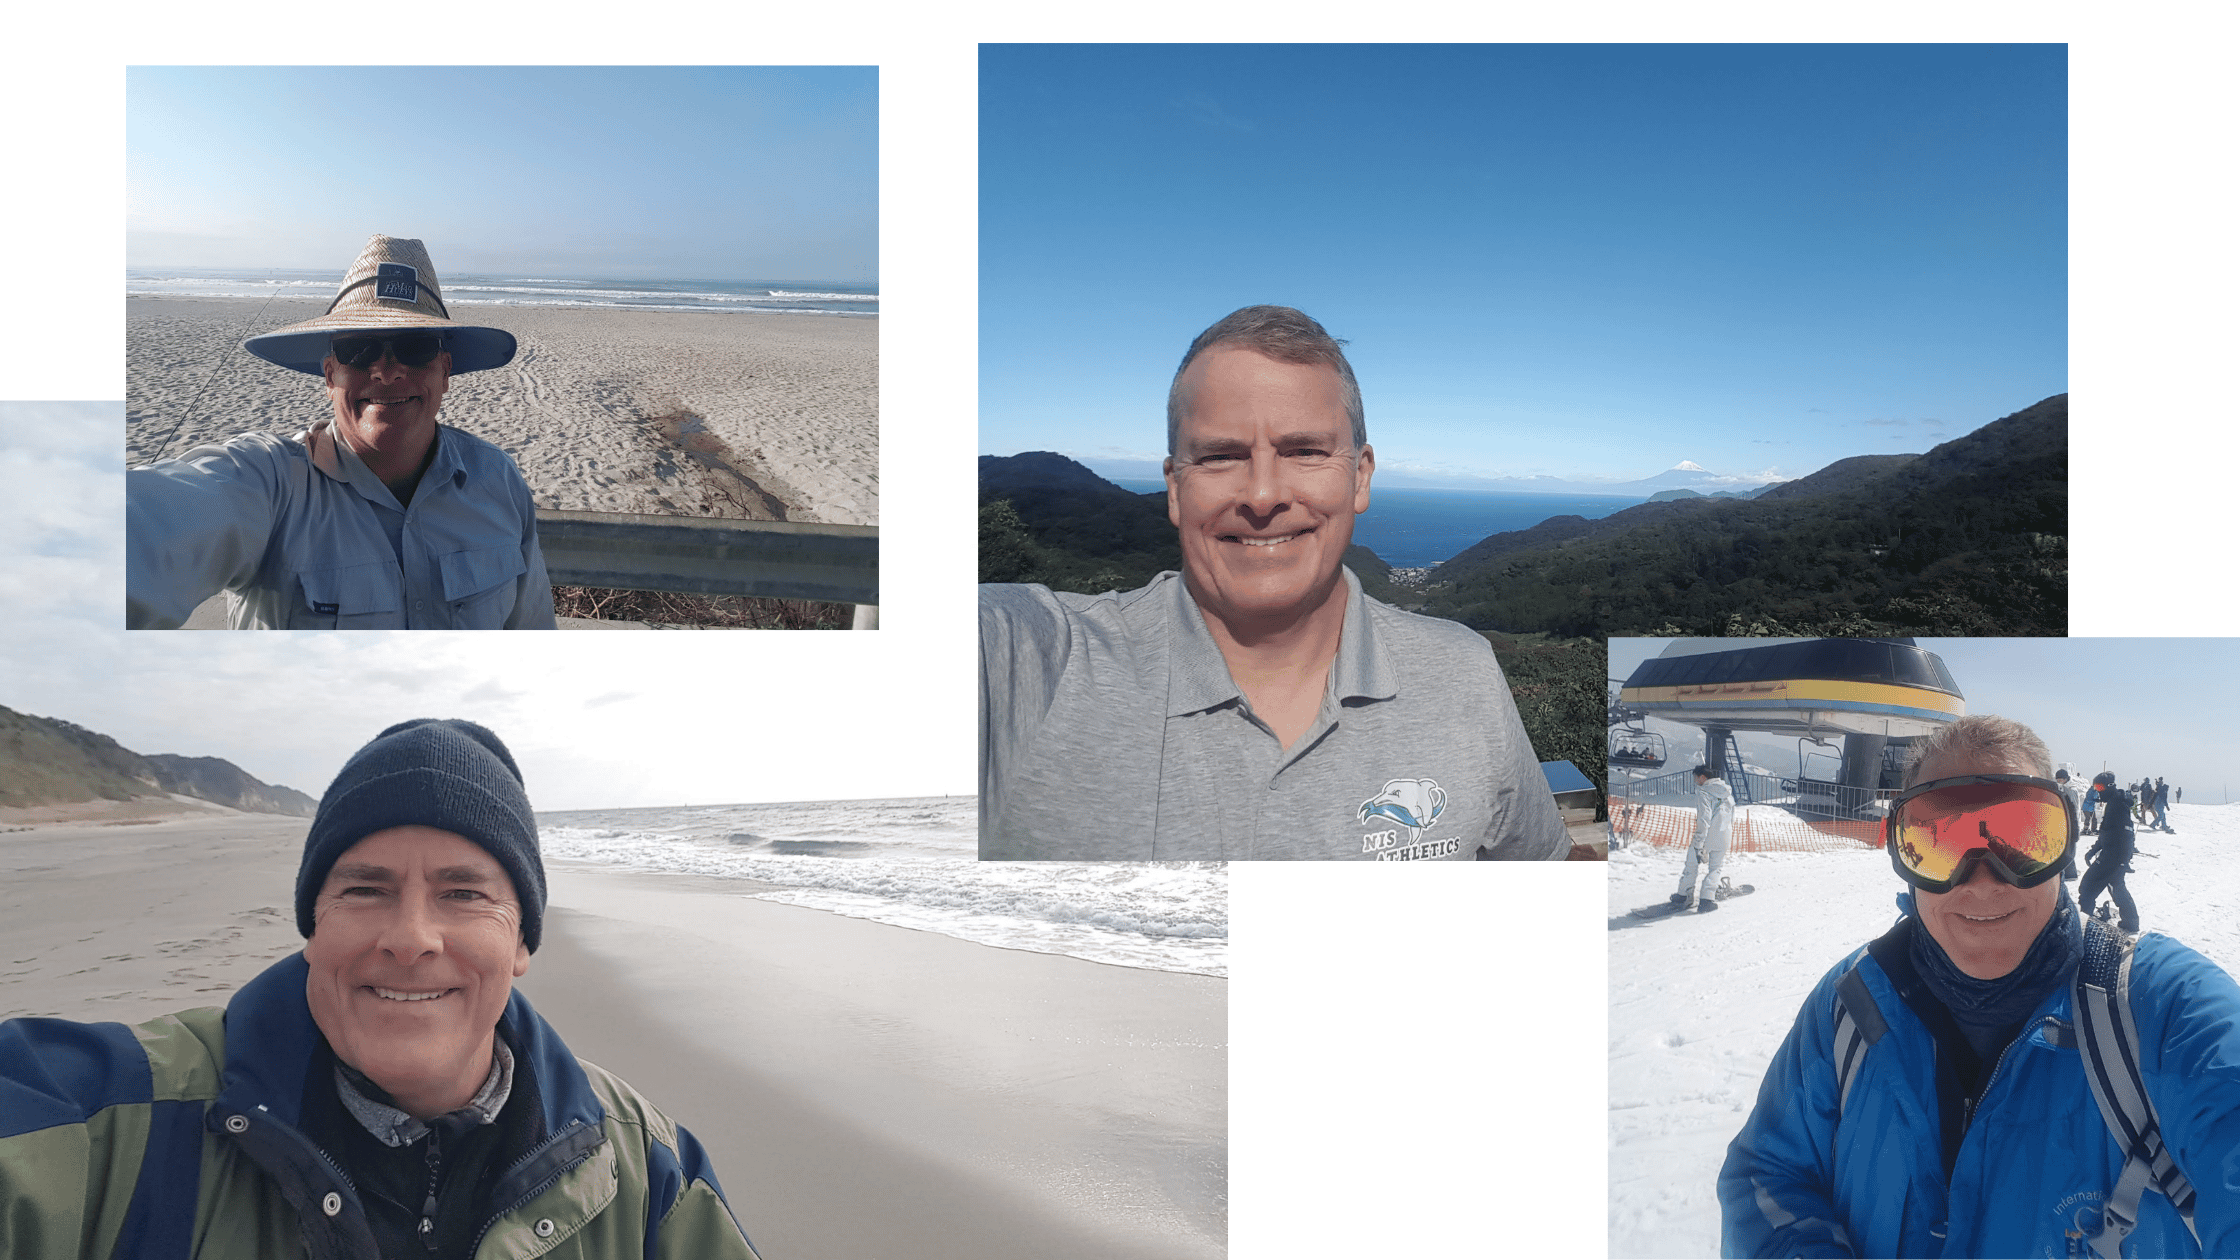 A collage of selfie photos with beach, snow, and forest backgrounds.